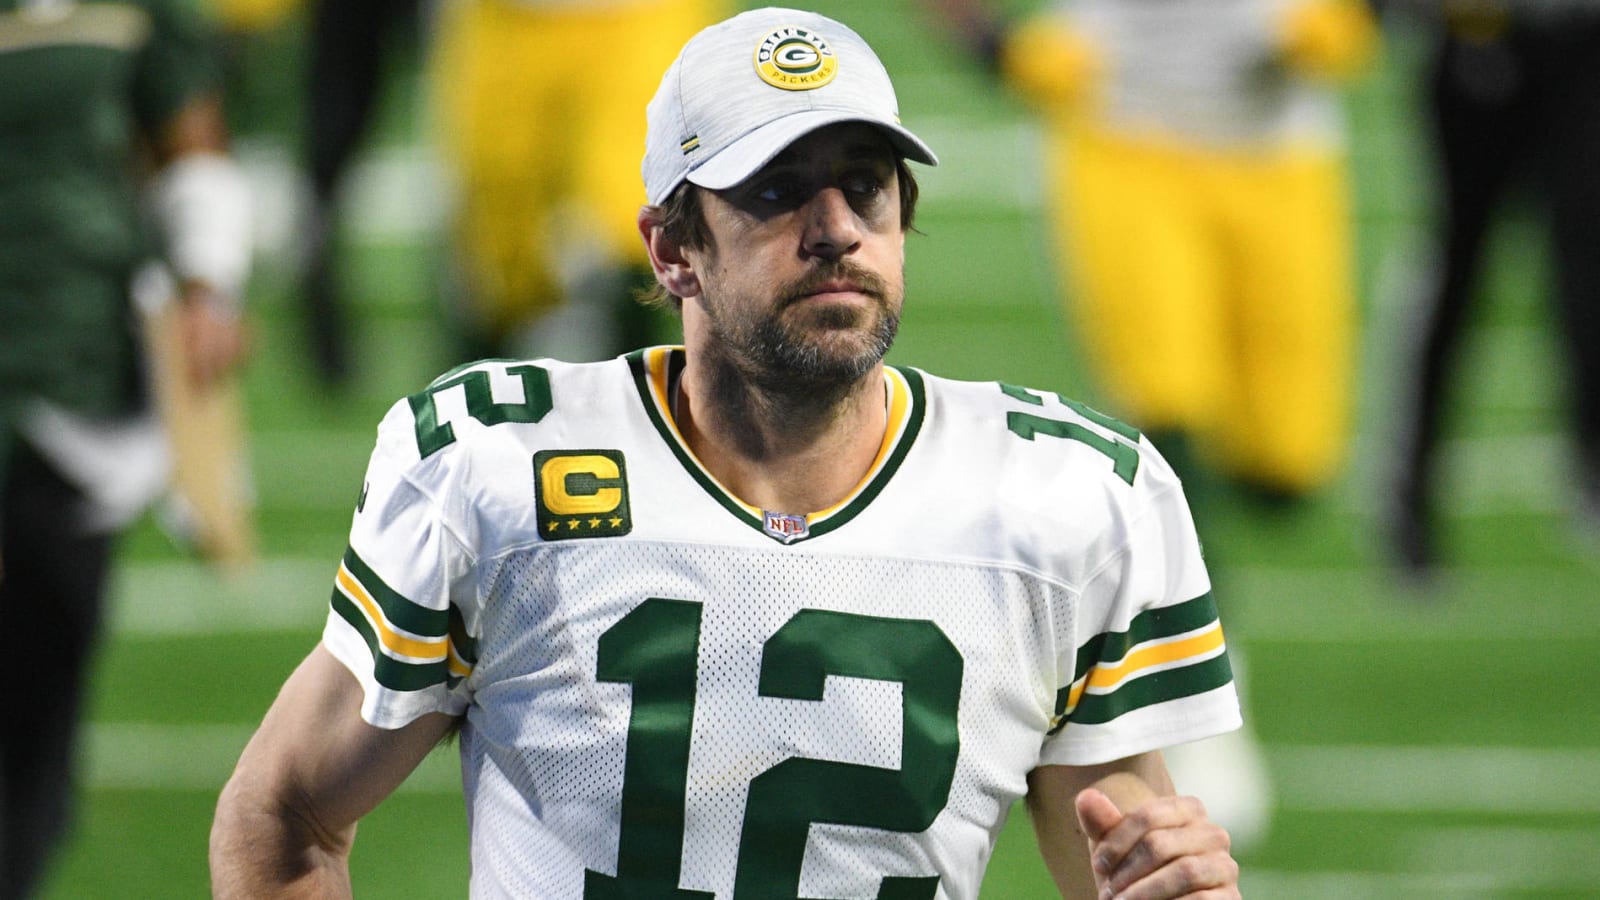 Report: Packers offered to make Rodgers highest-paid player